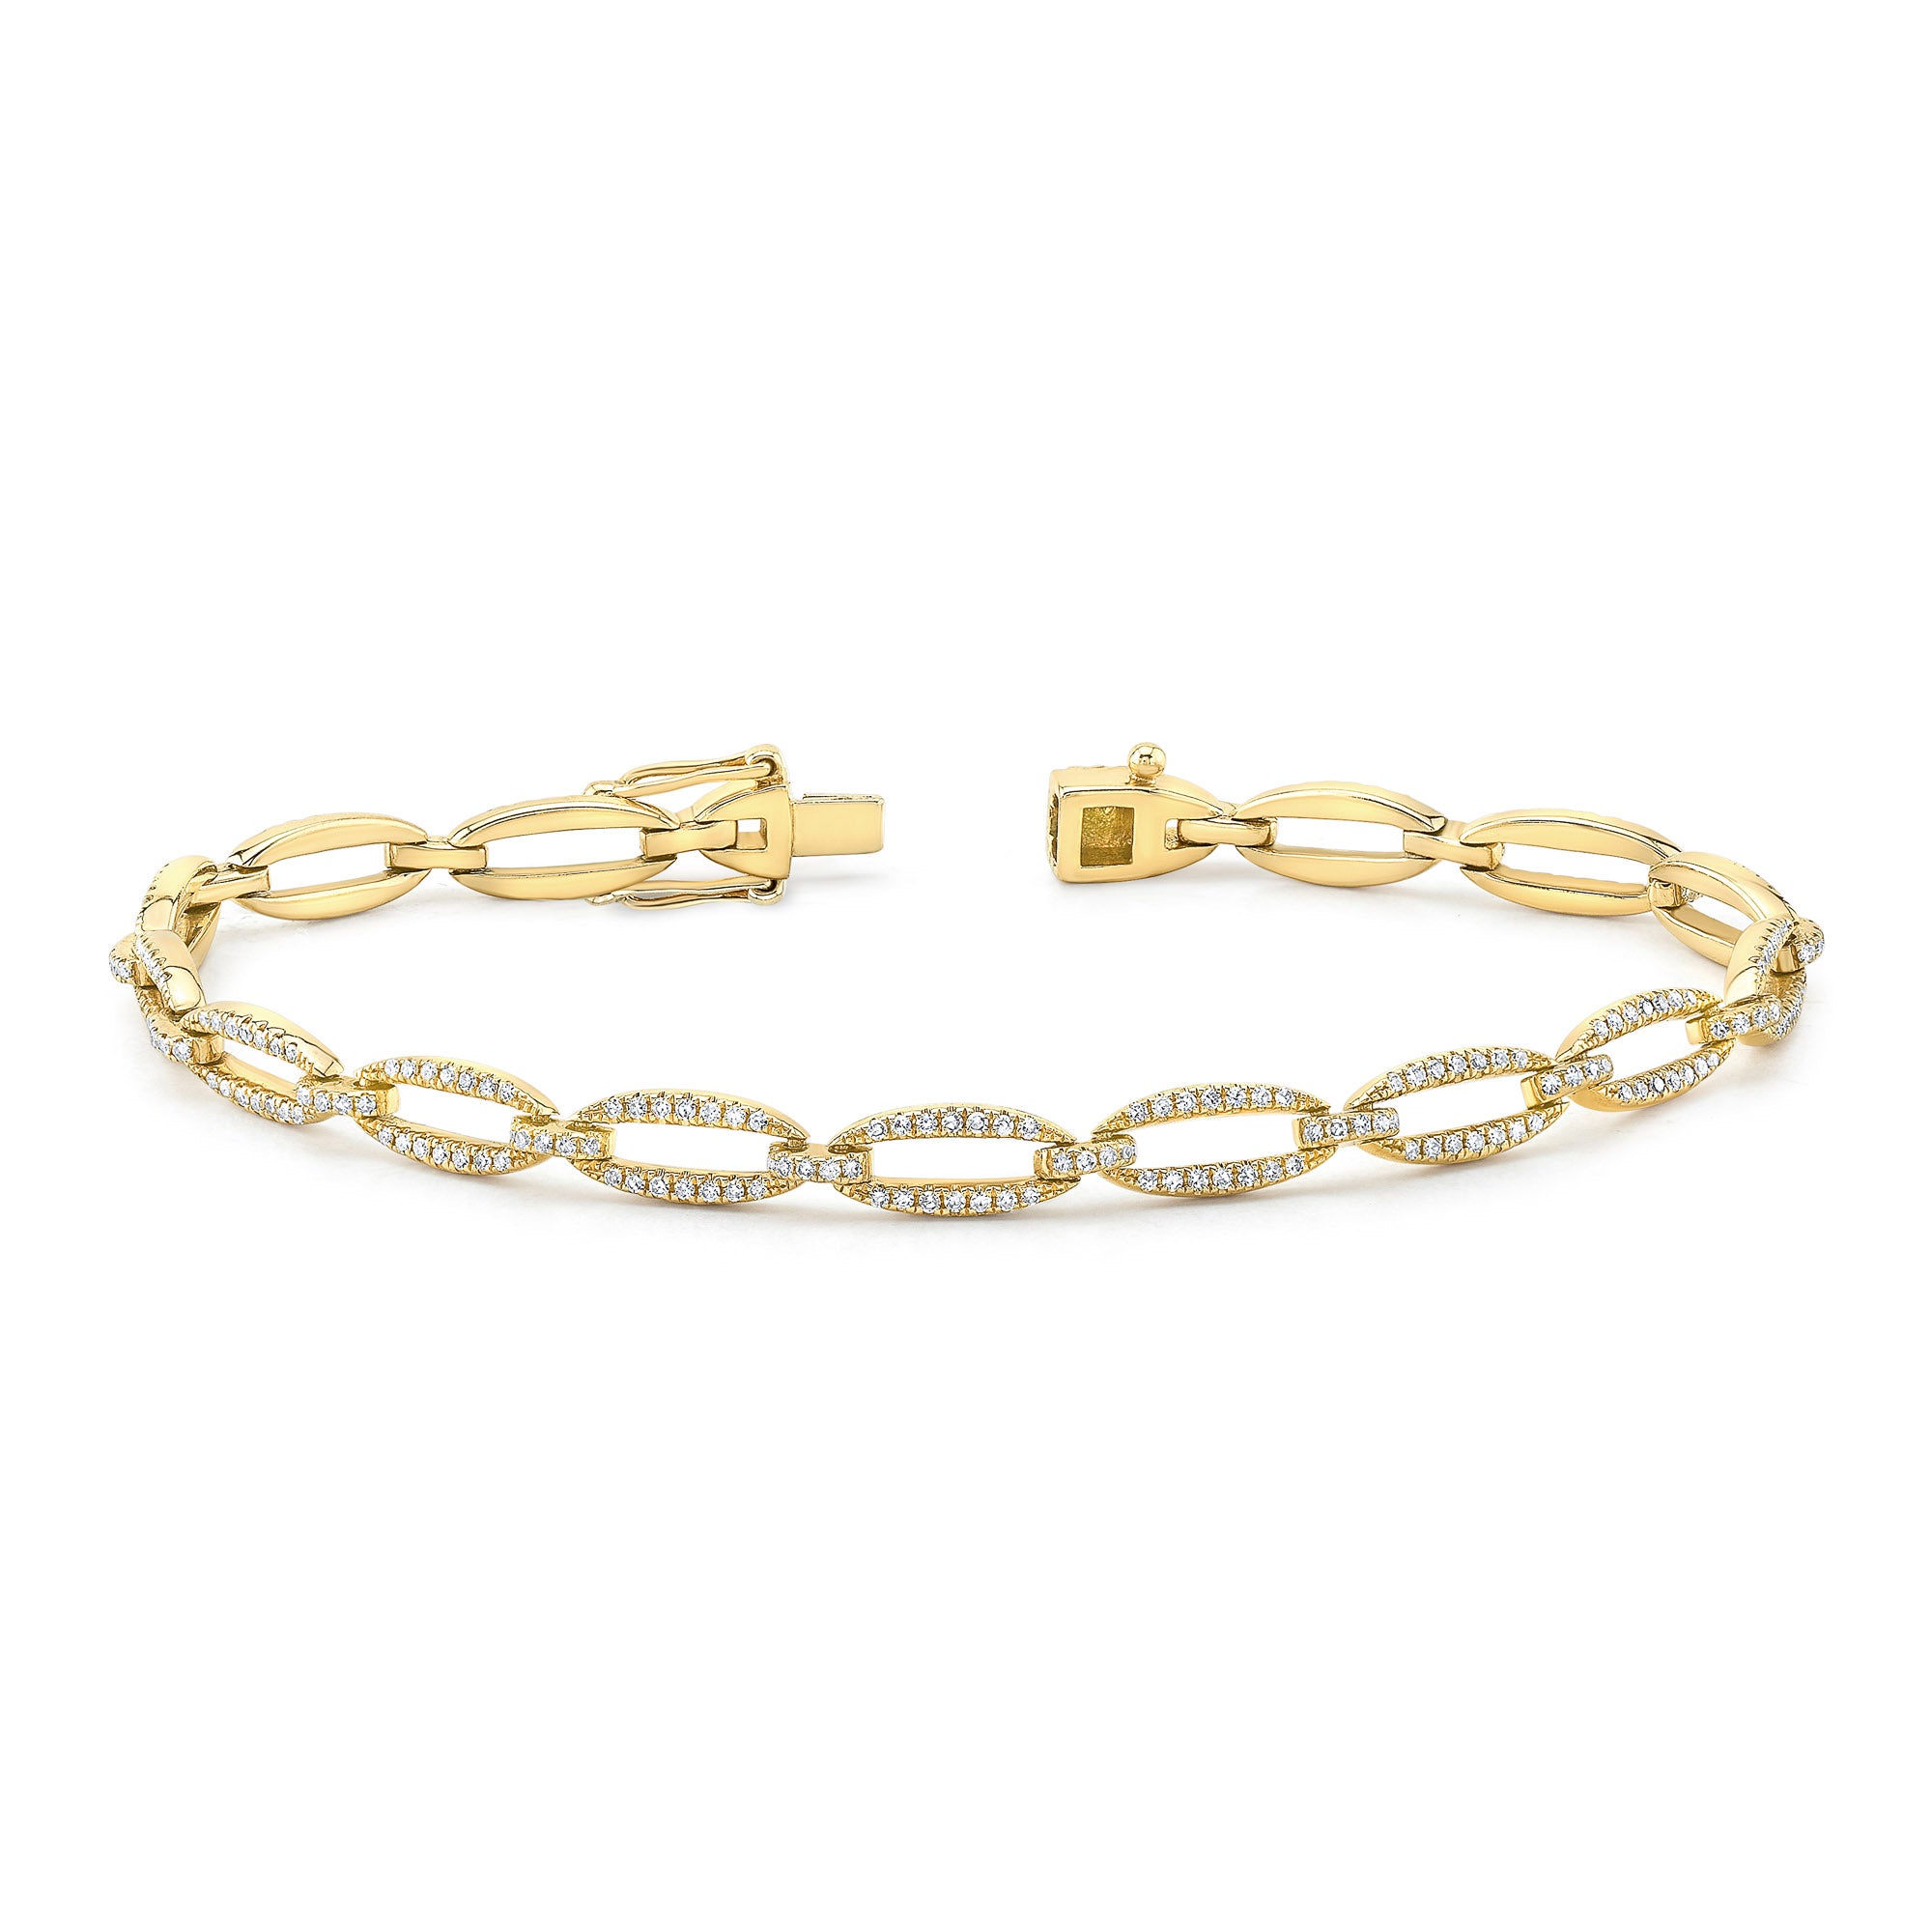 JustDesi Oval Link Bracelet in Yellow Gold